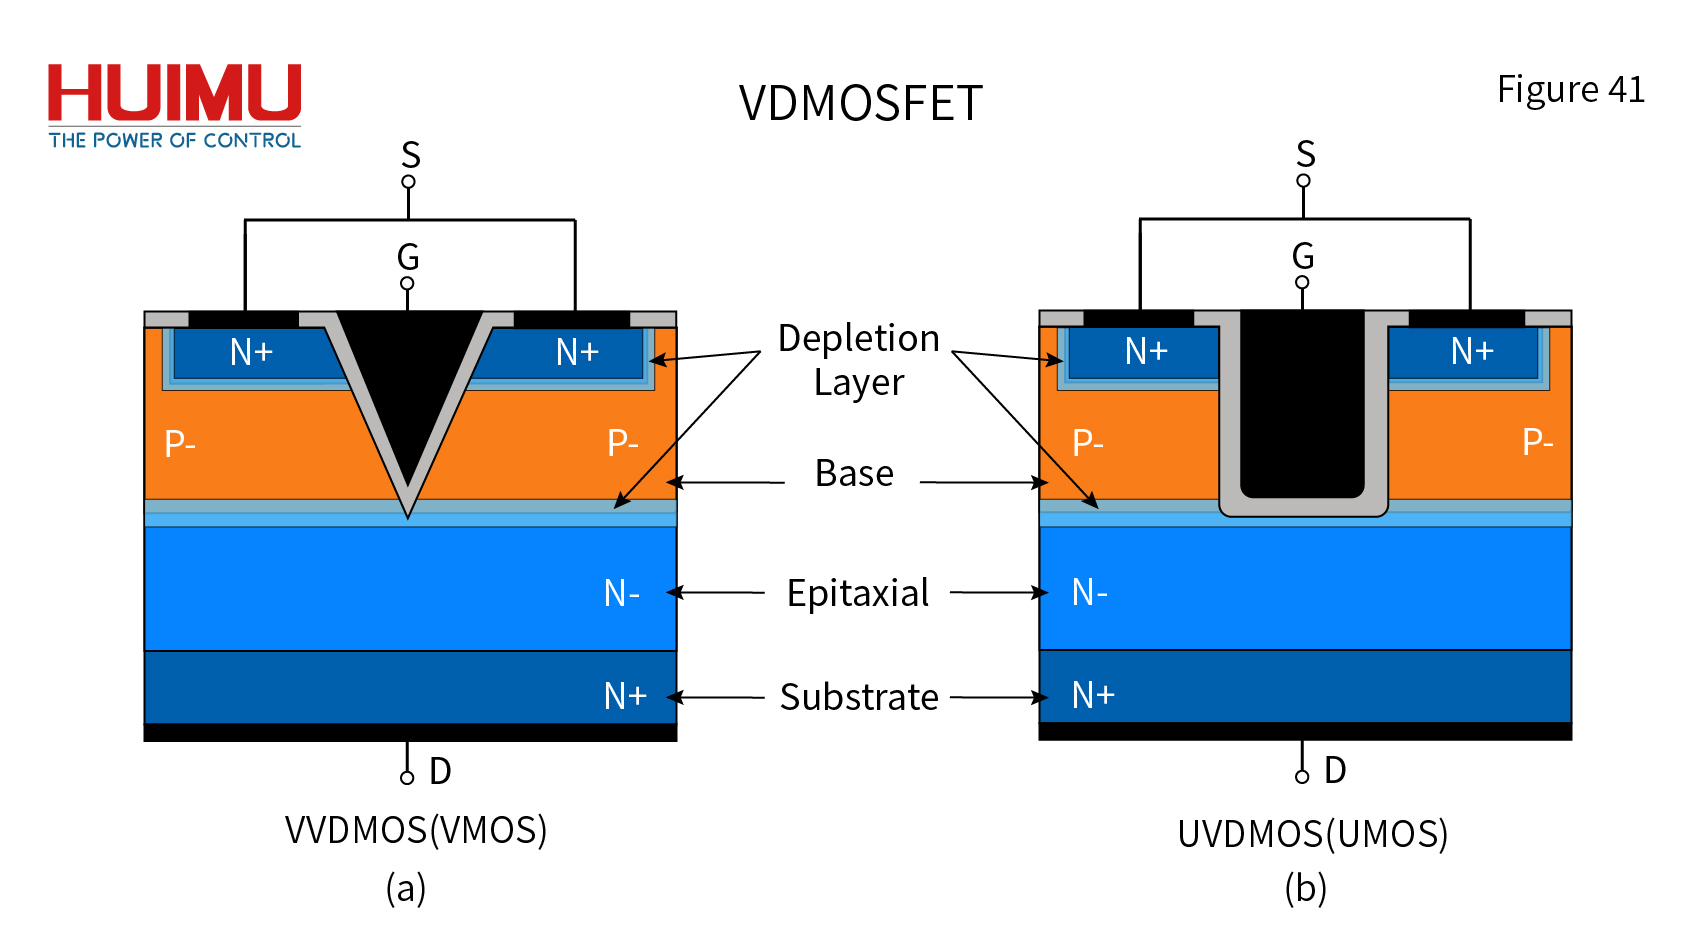 The Structure and Symbol of VDMOSFET